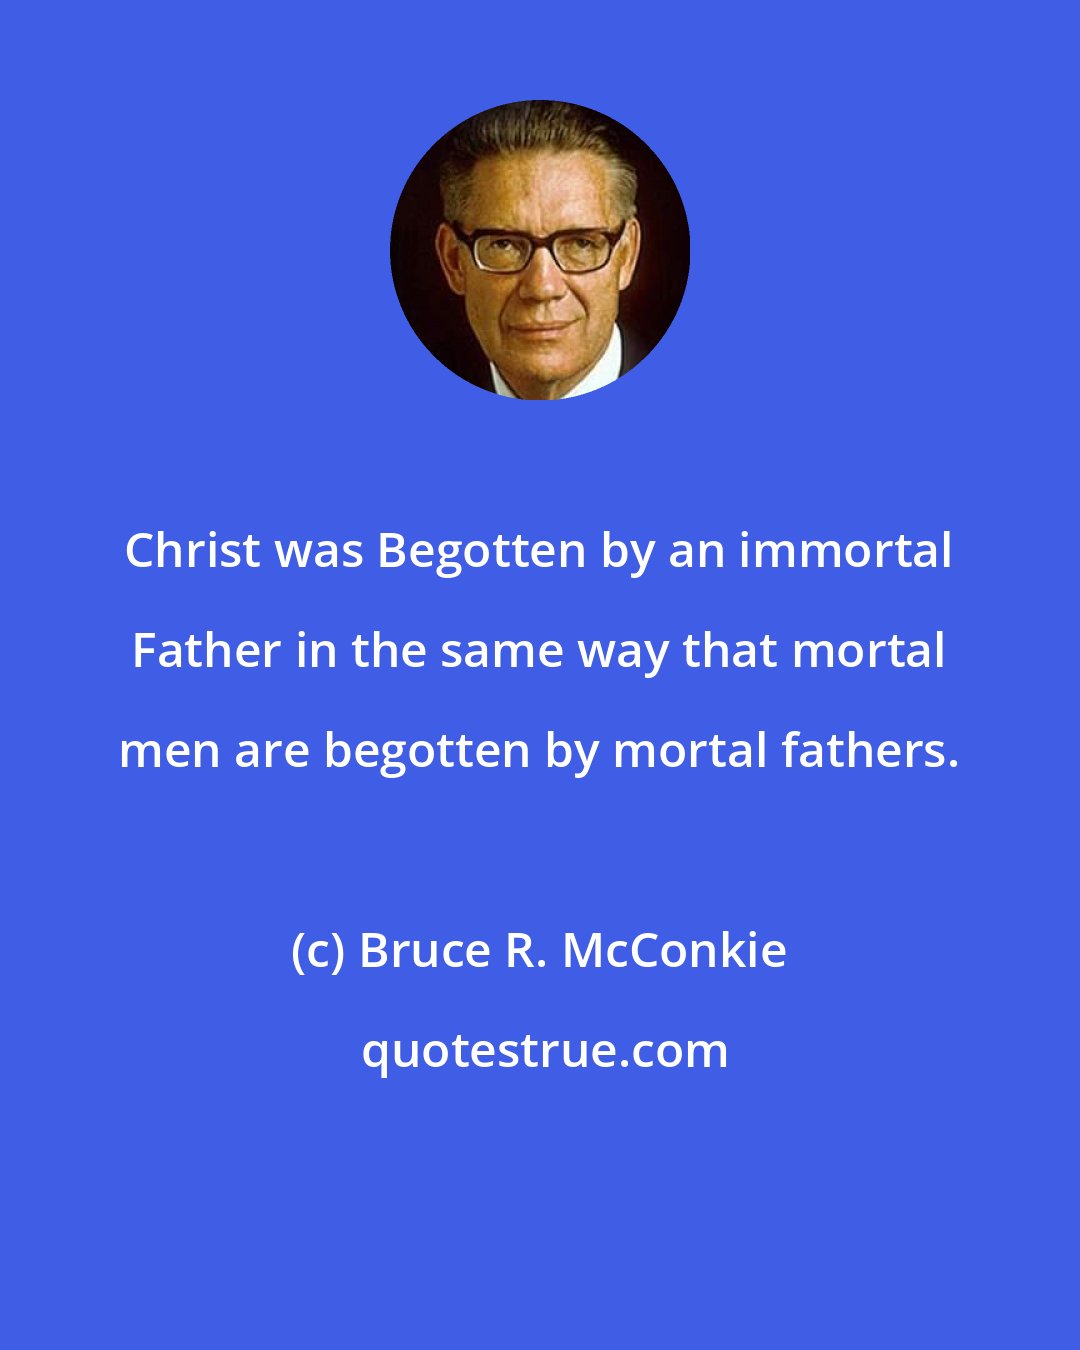 Bruce R. McConkie: Christ was Begotten by an immortal Father in the same way that mortal men are begotten by mortal fathers.